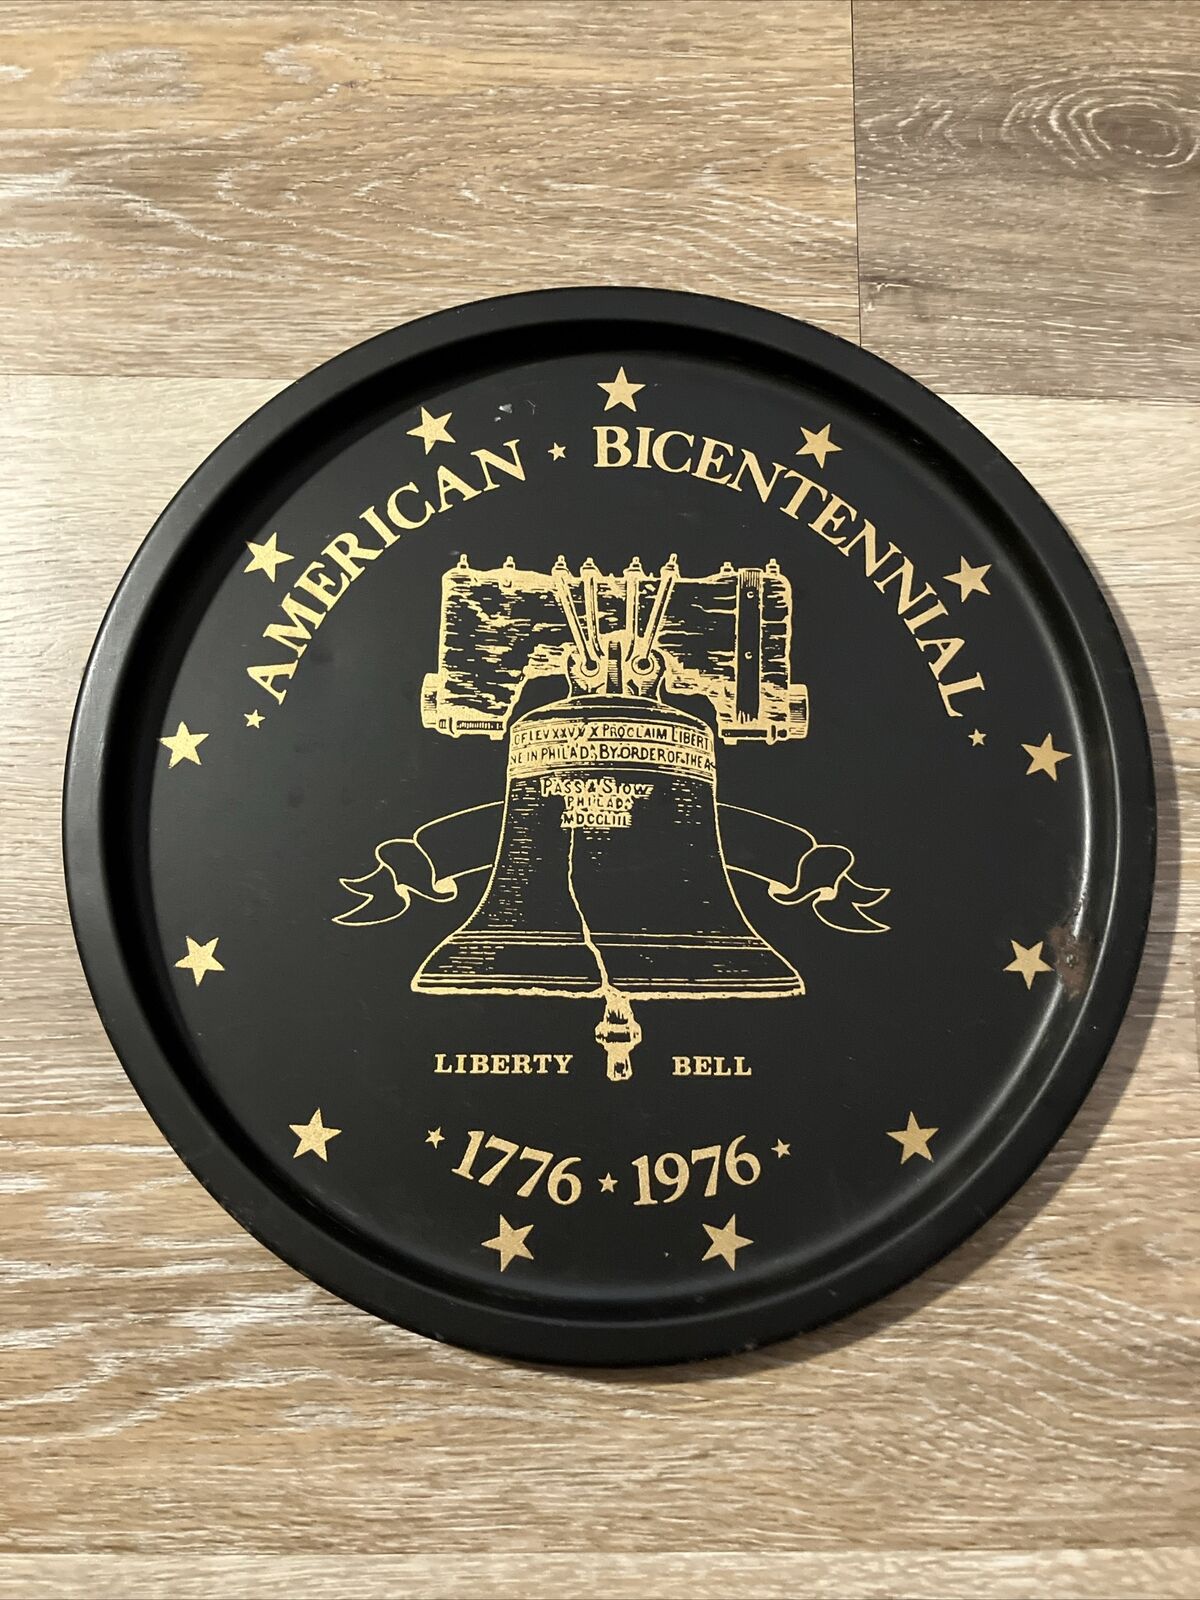 American Bicentennial Liberty Bell 1776-1976 Collectible Plate/Decoration Piece?